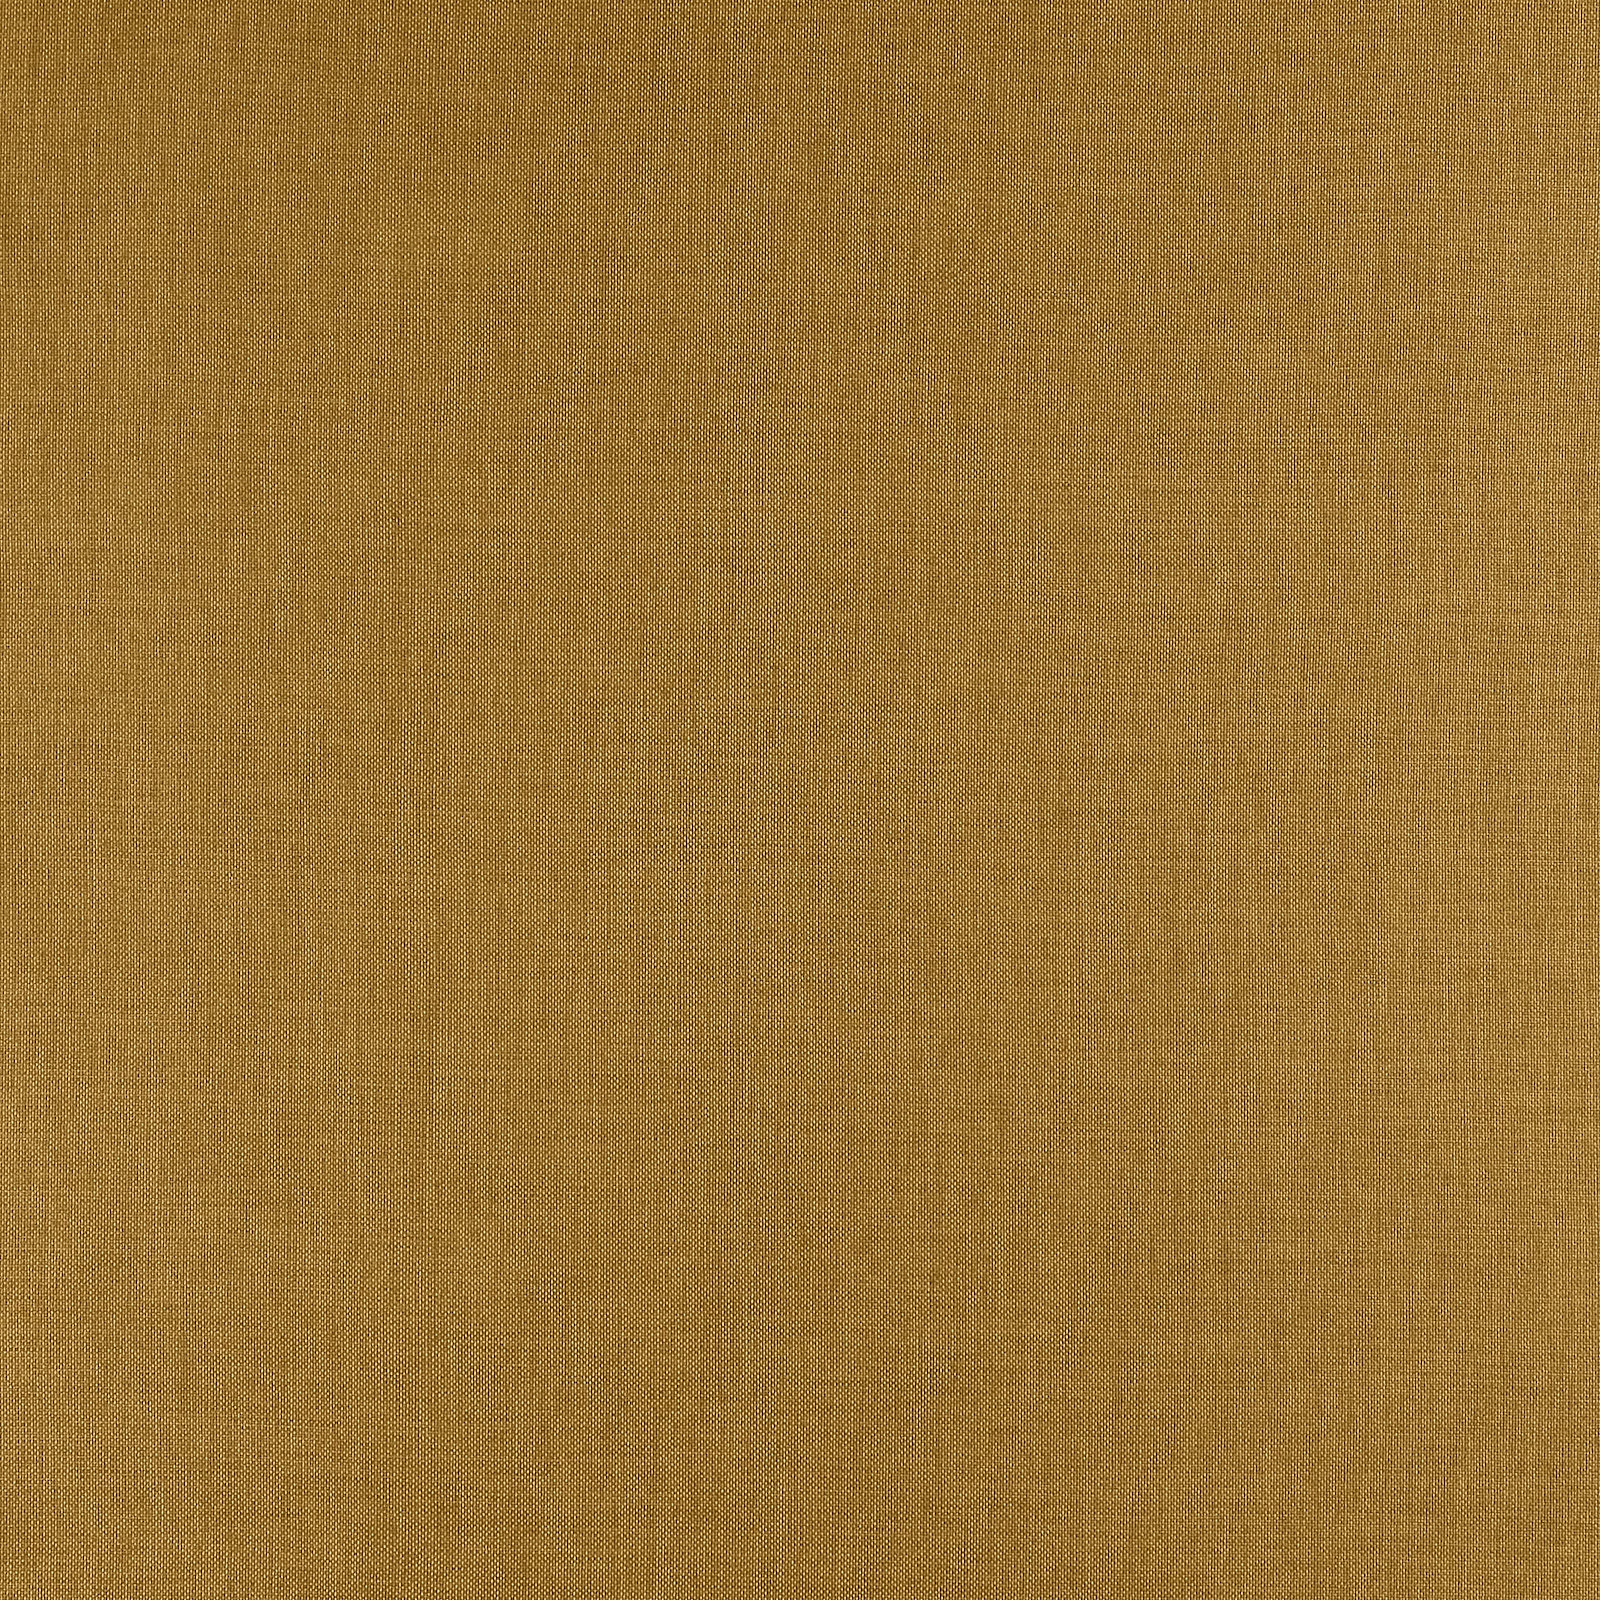 Upholstery fabric light dusty olive 826250_pack_solid